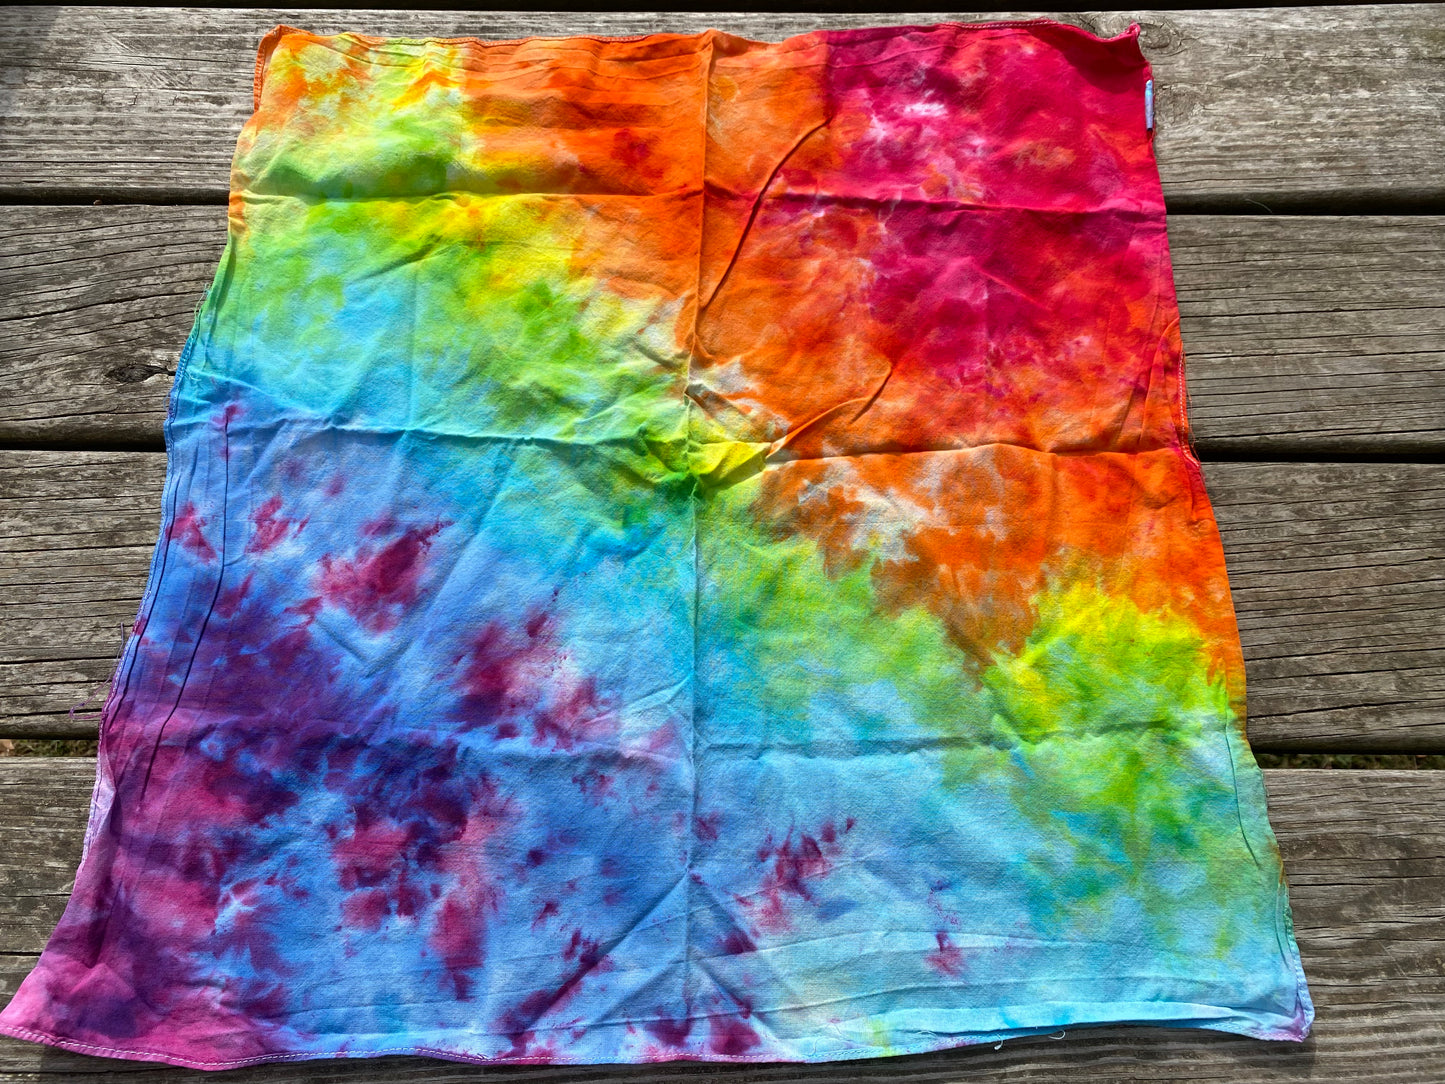 Square Bandanas - You choose color! Rainbow, galaxy, and so many more!